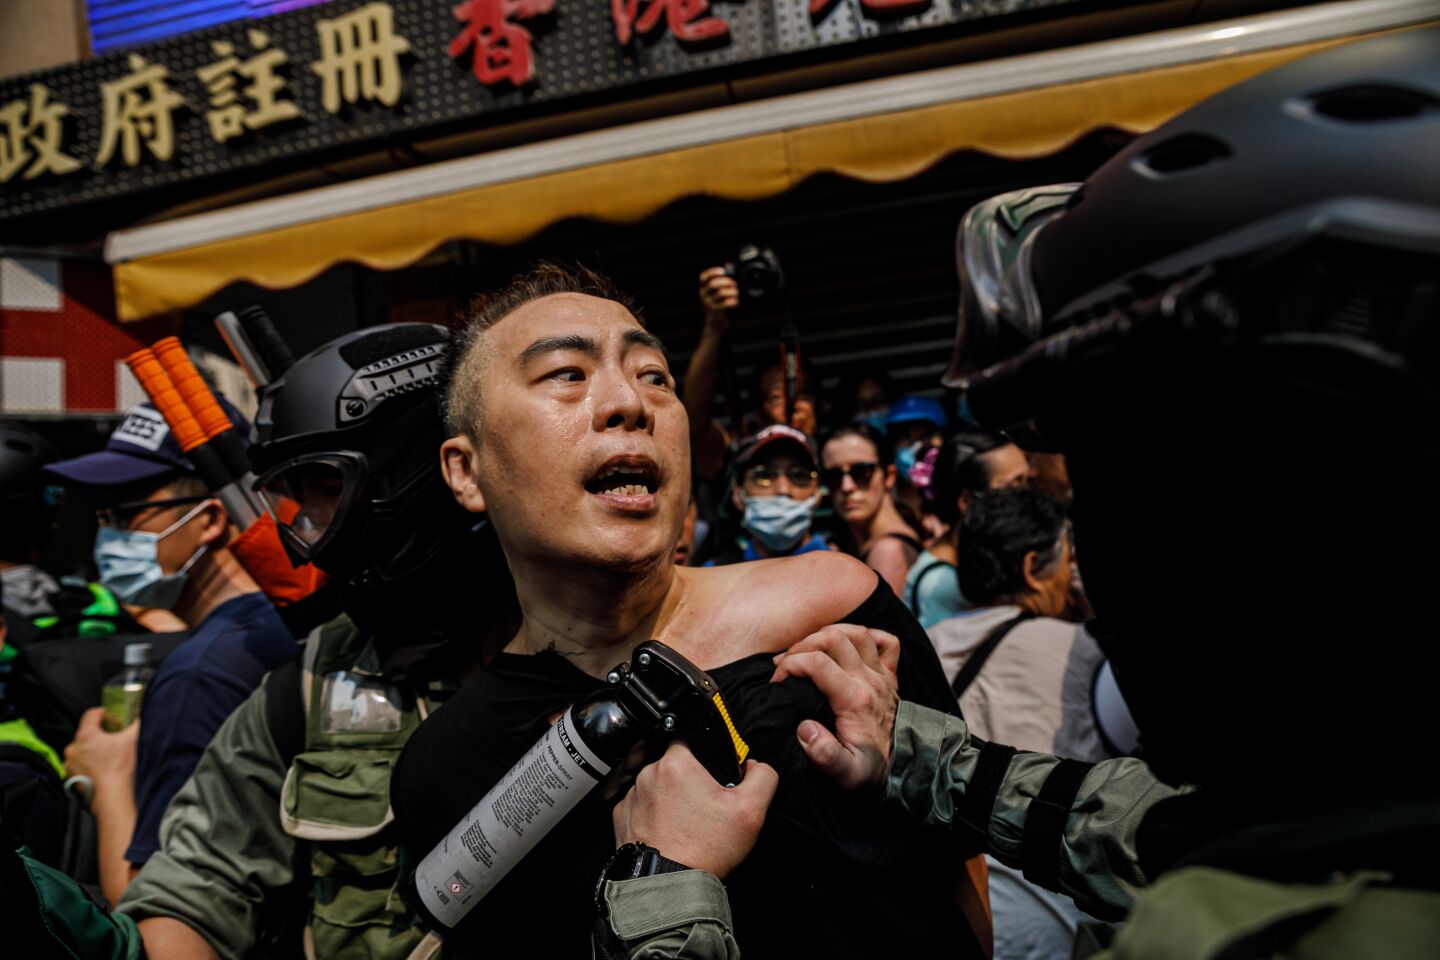 Hong Kong police officers in riot gear arrest a man they try to disperse demonstrators, gathering in defiance of the upcoming China's national day, in Causeway Bay area of Hong Kong, on Sept. 29, 2019.